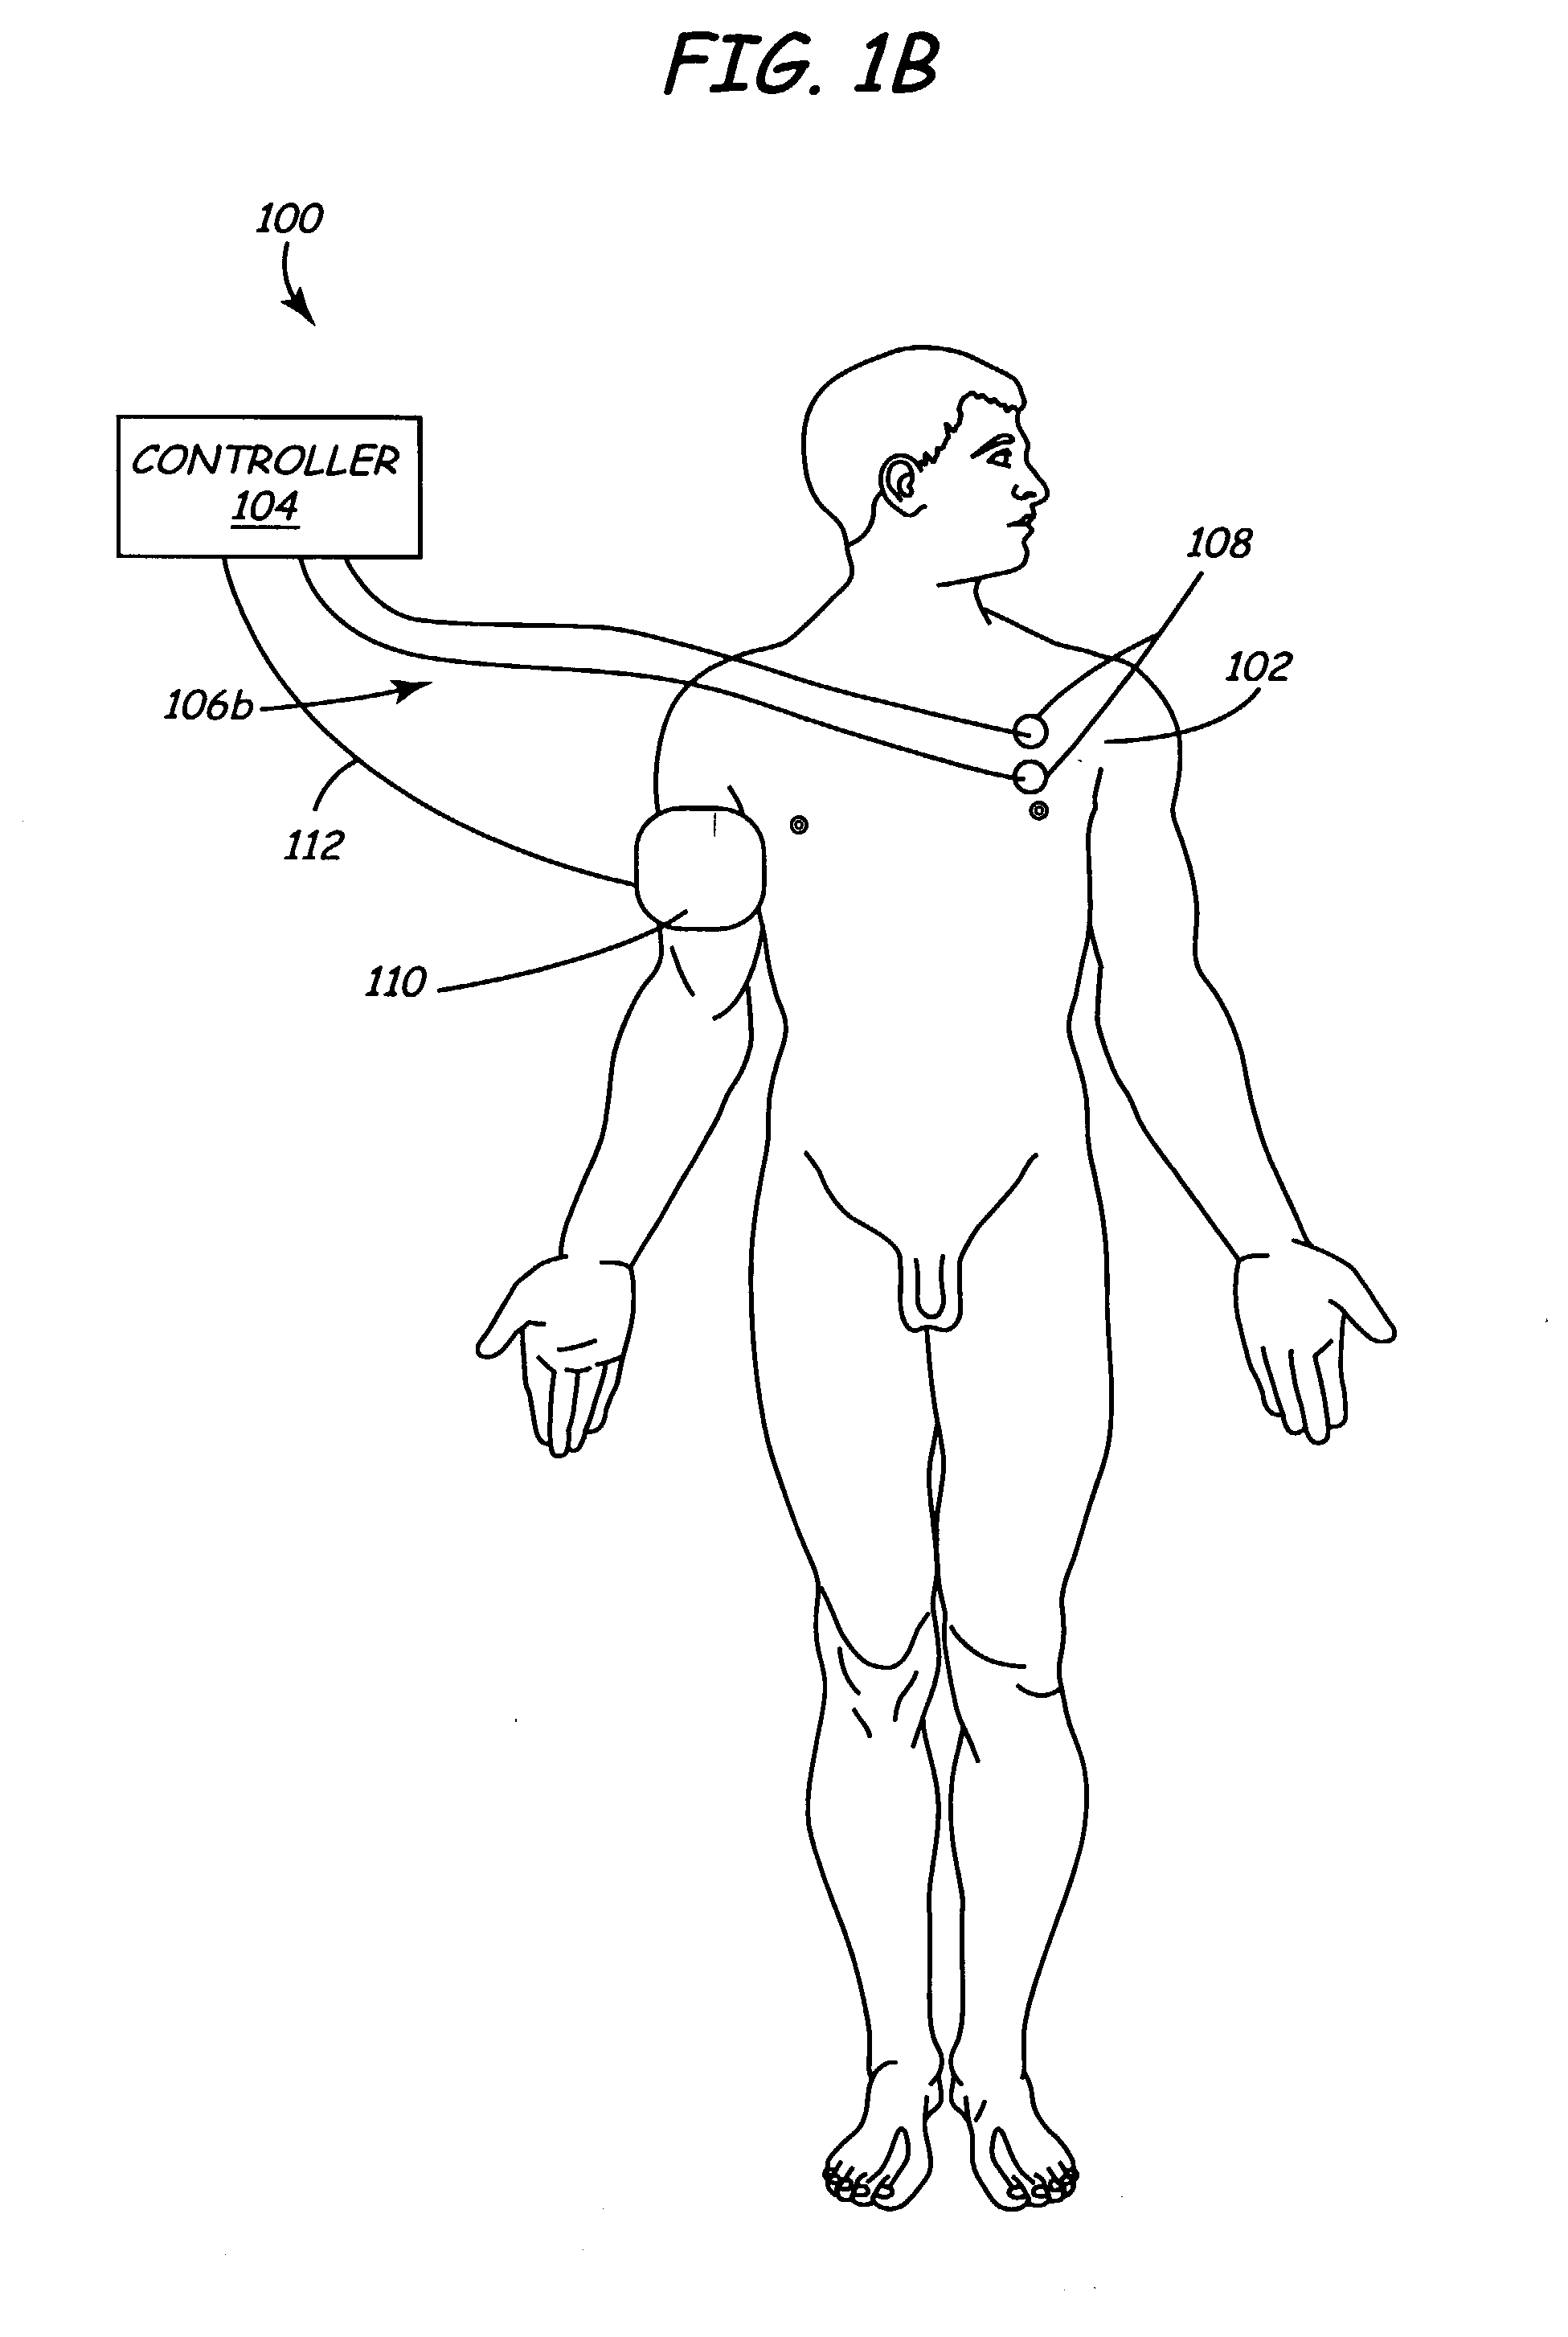 Method and apparatus for electrically stimulating the nervous system to improve ventricular dysfunction, heart failure, and other cardiac conditions